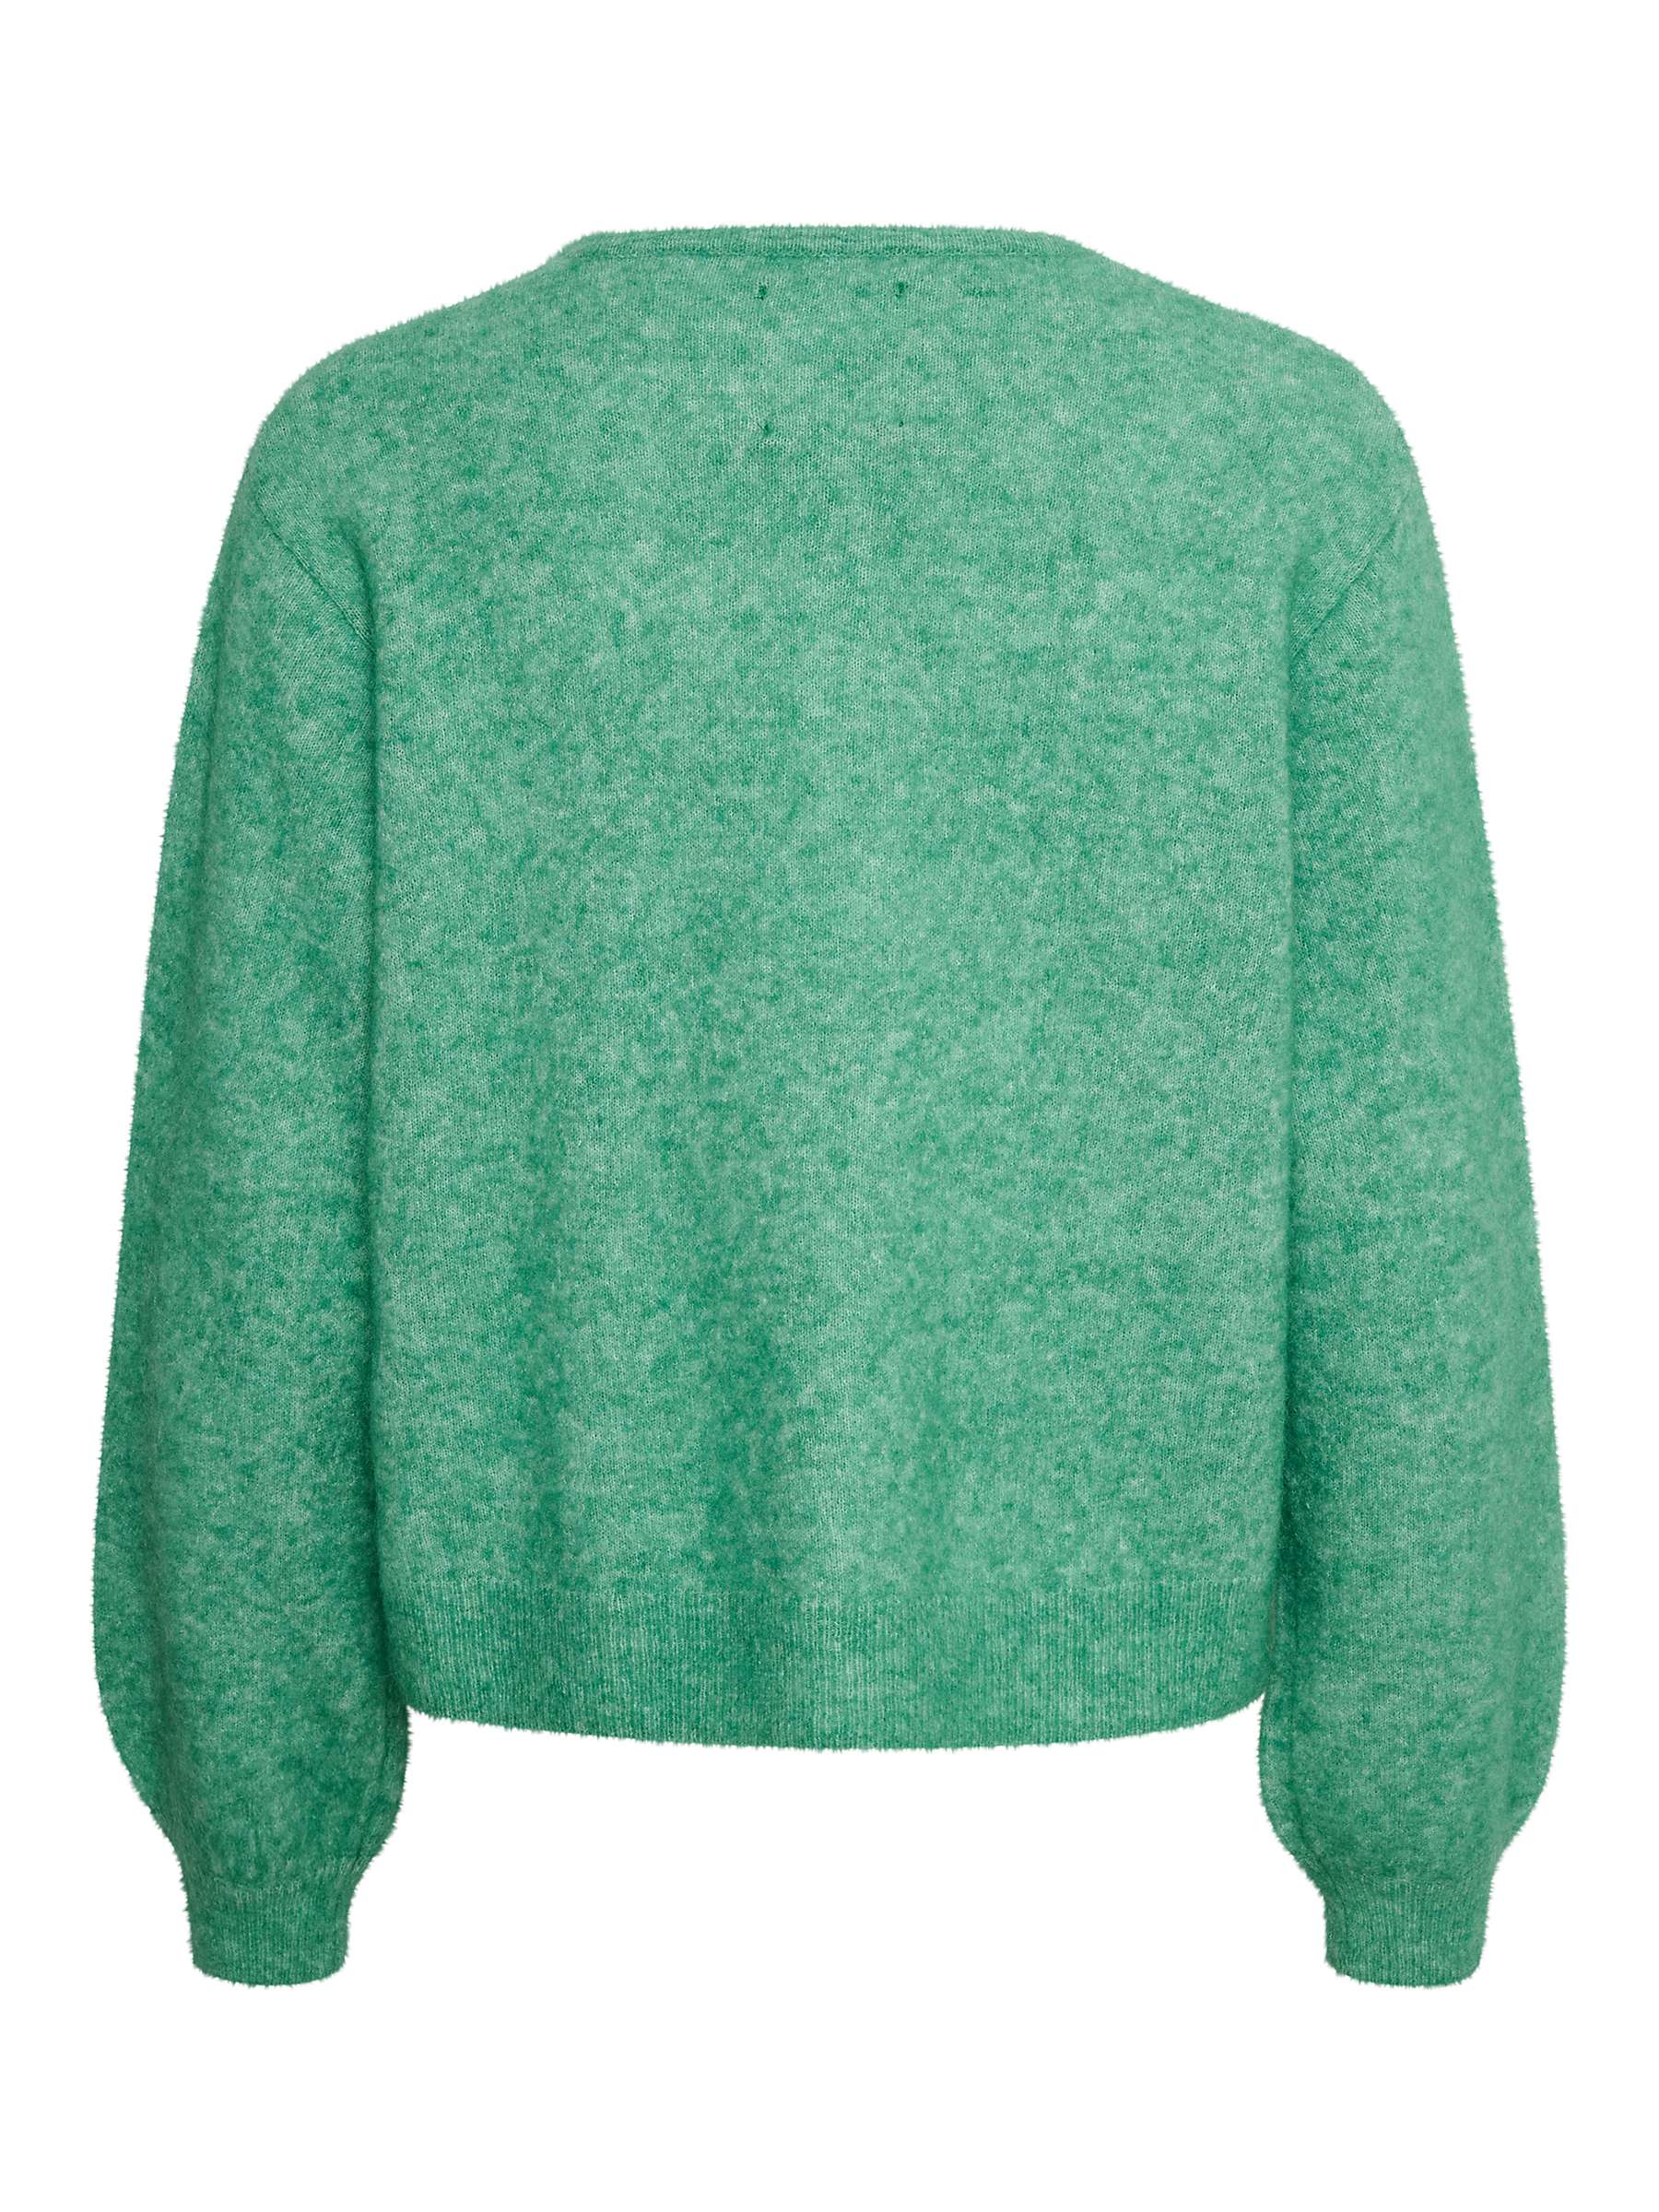 Buy Part Two Ninell Double Button Wool Blend Cardigan, Green Spruce Online at johnlewis.com